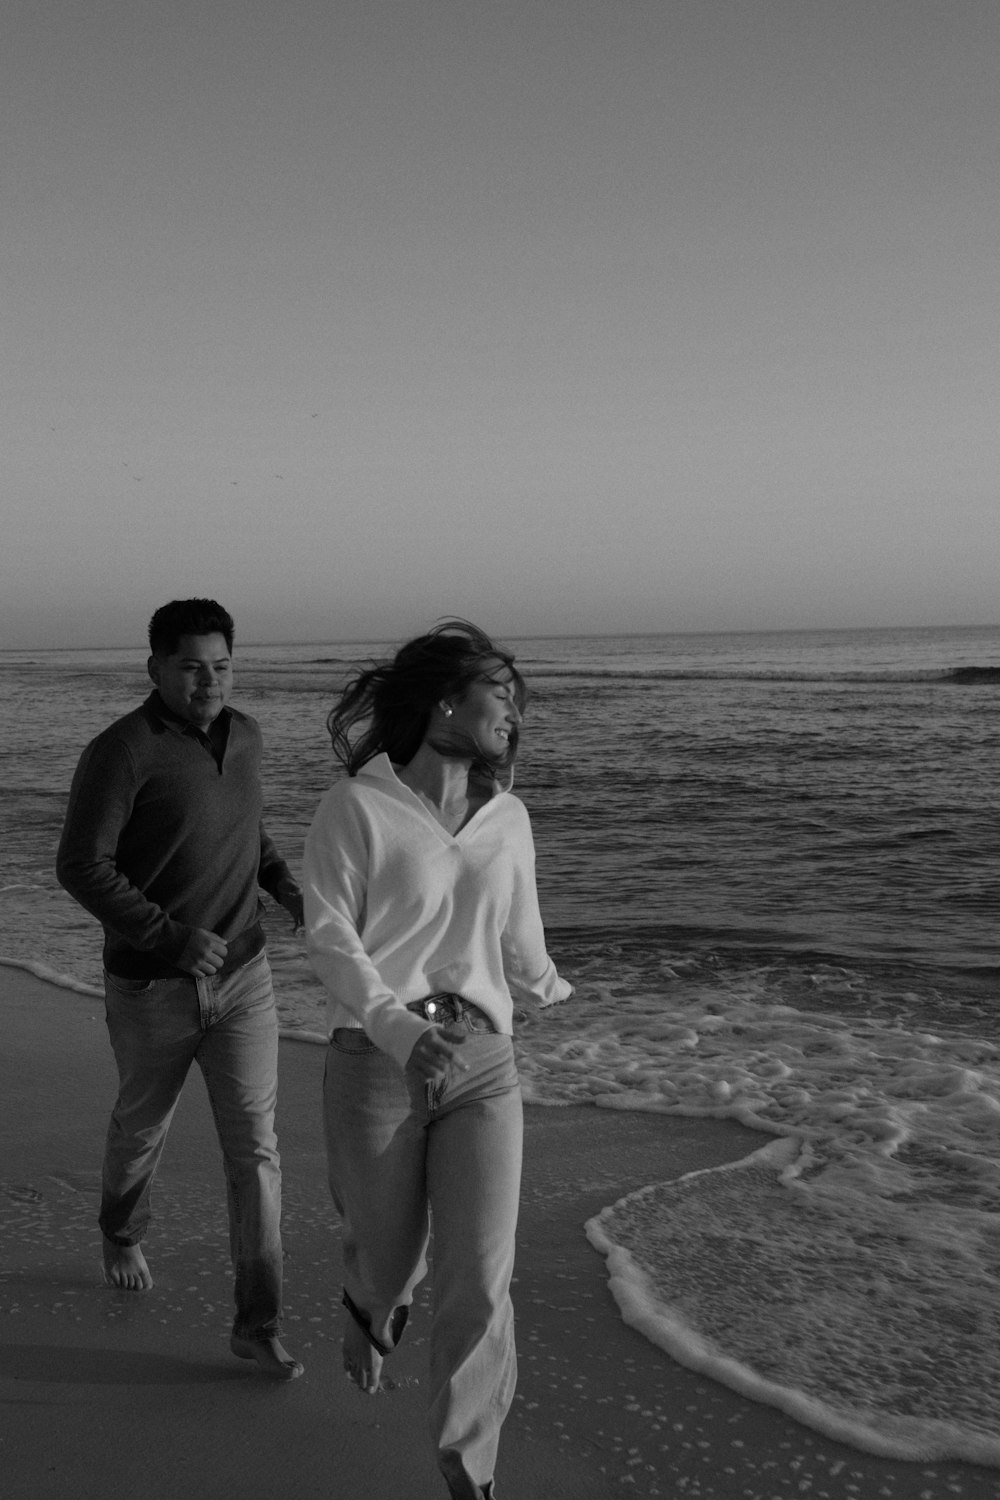 a man and a woman walking along the beach